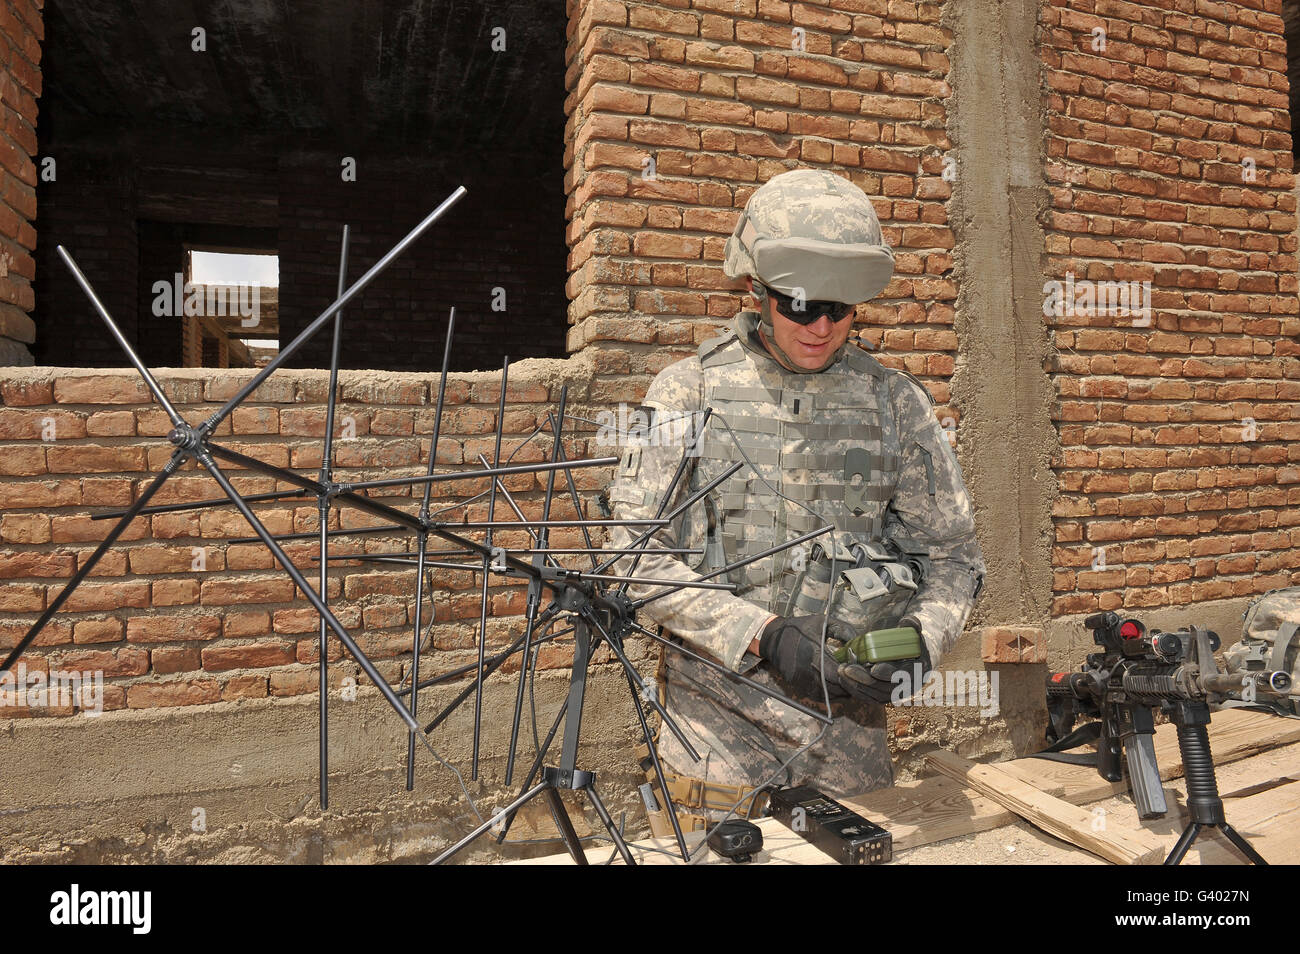 U.S. Army soldier configures a satellite communication device. Stock Photo